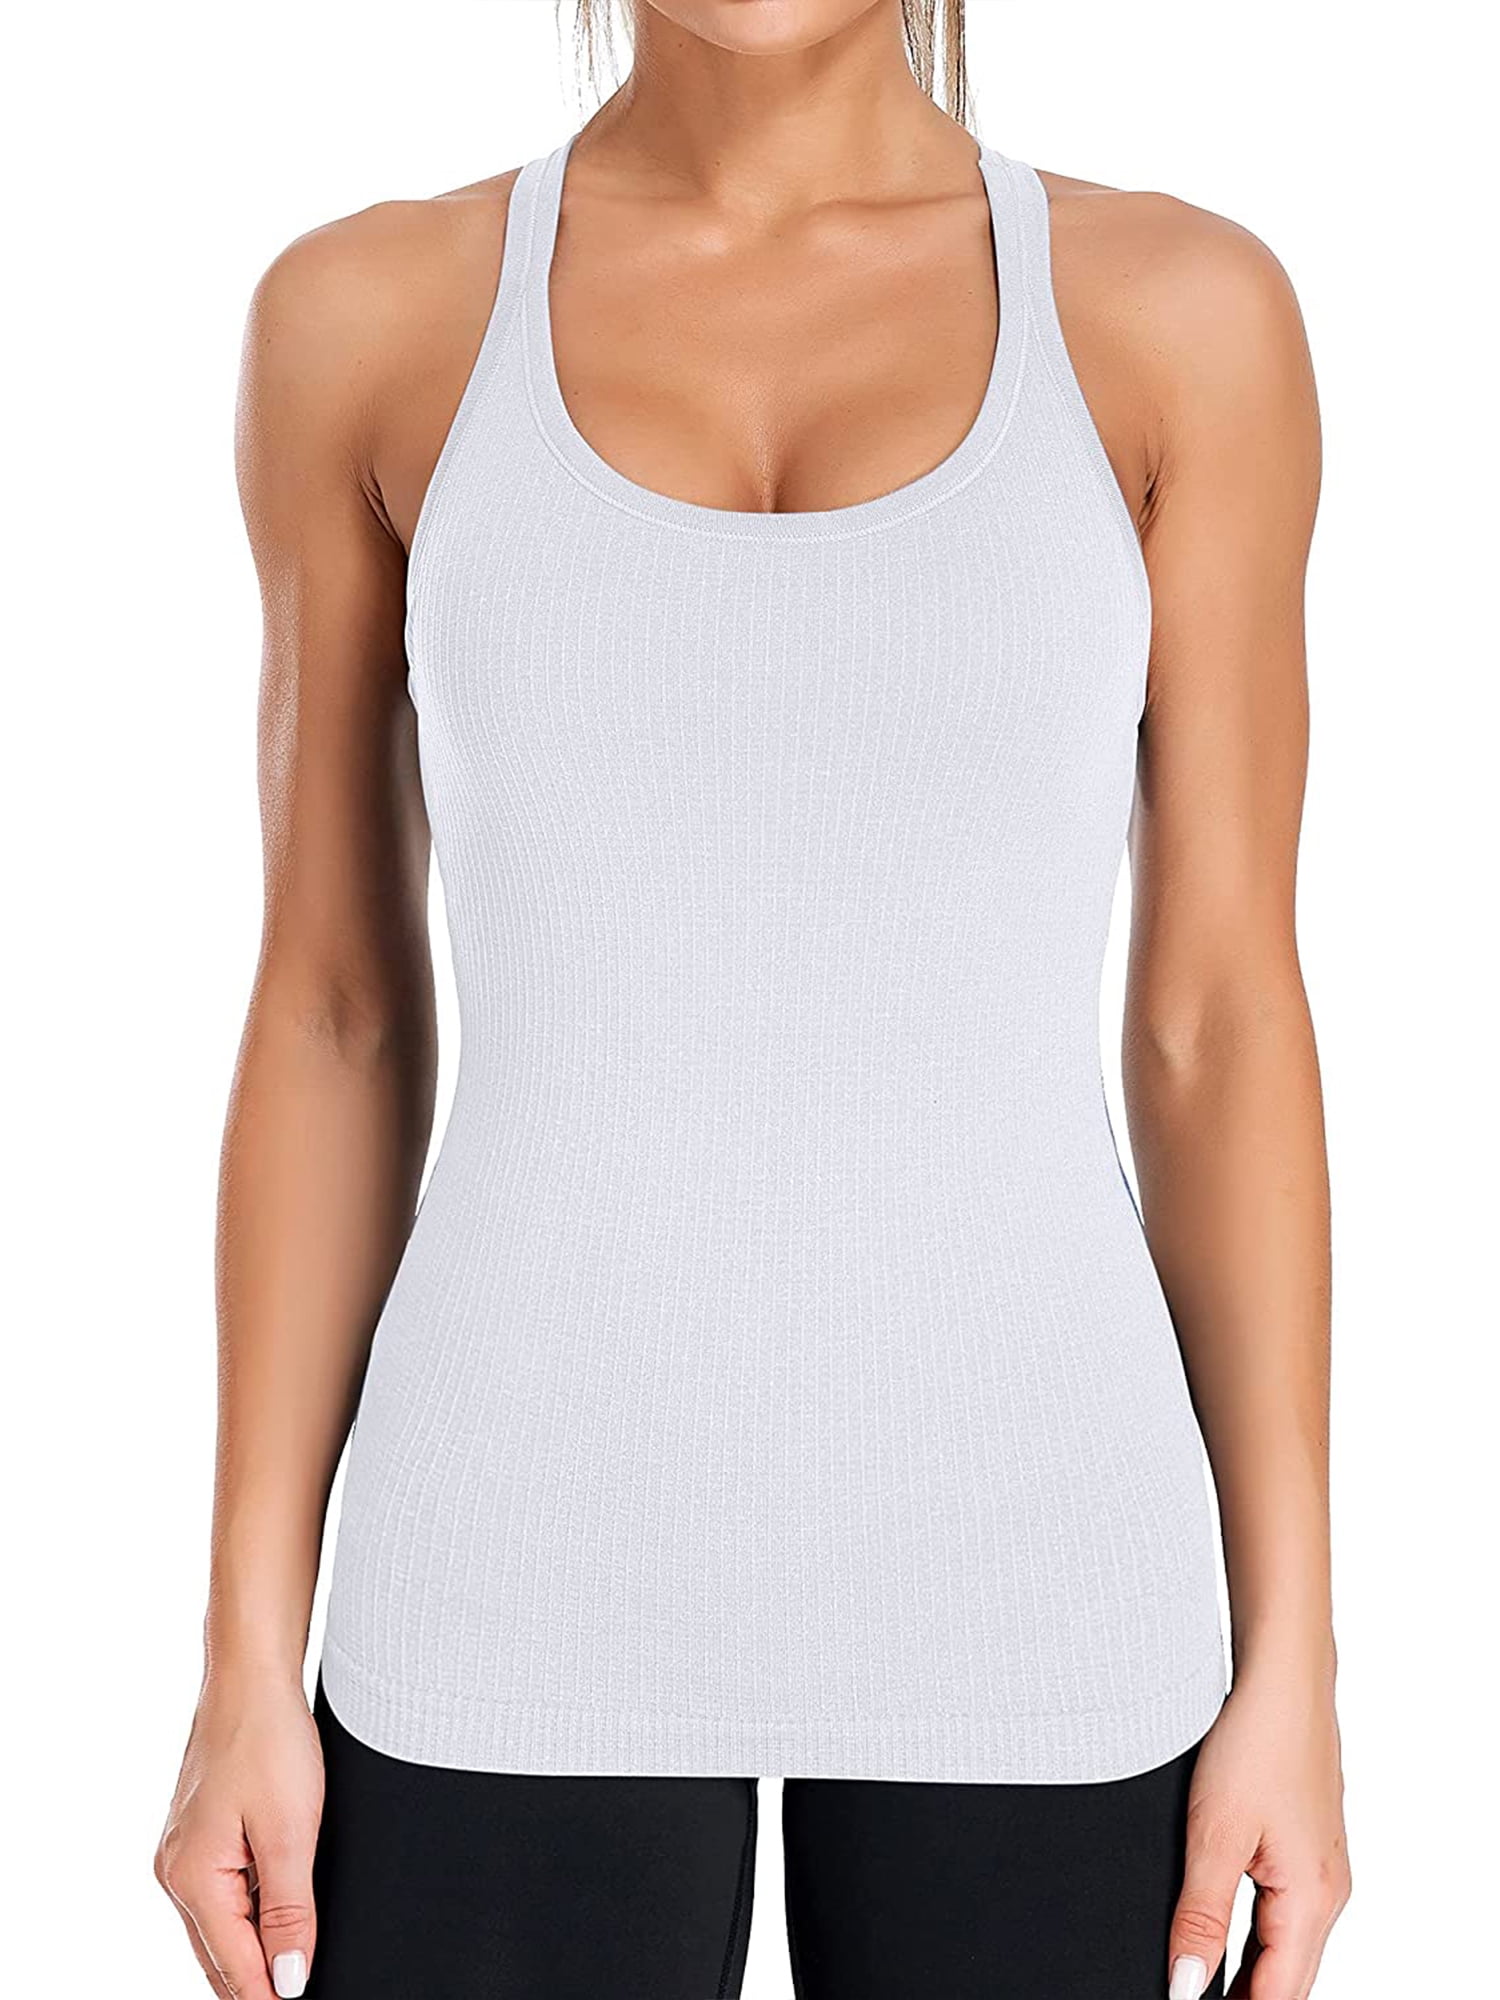 Best Deal for Ribbed Workout Tank Tops for Women with Built in Bra Tight